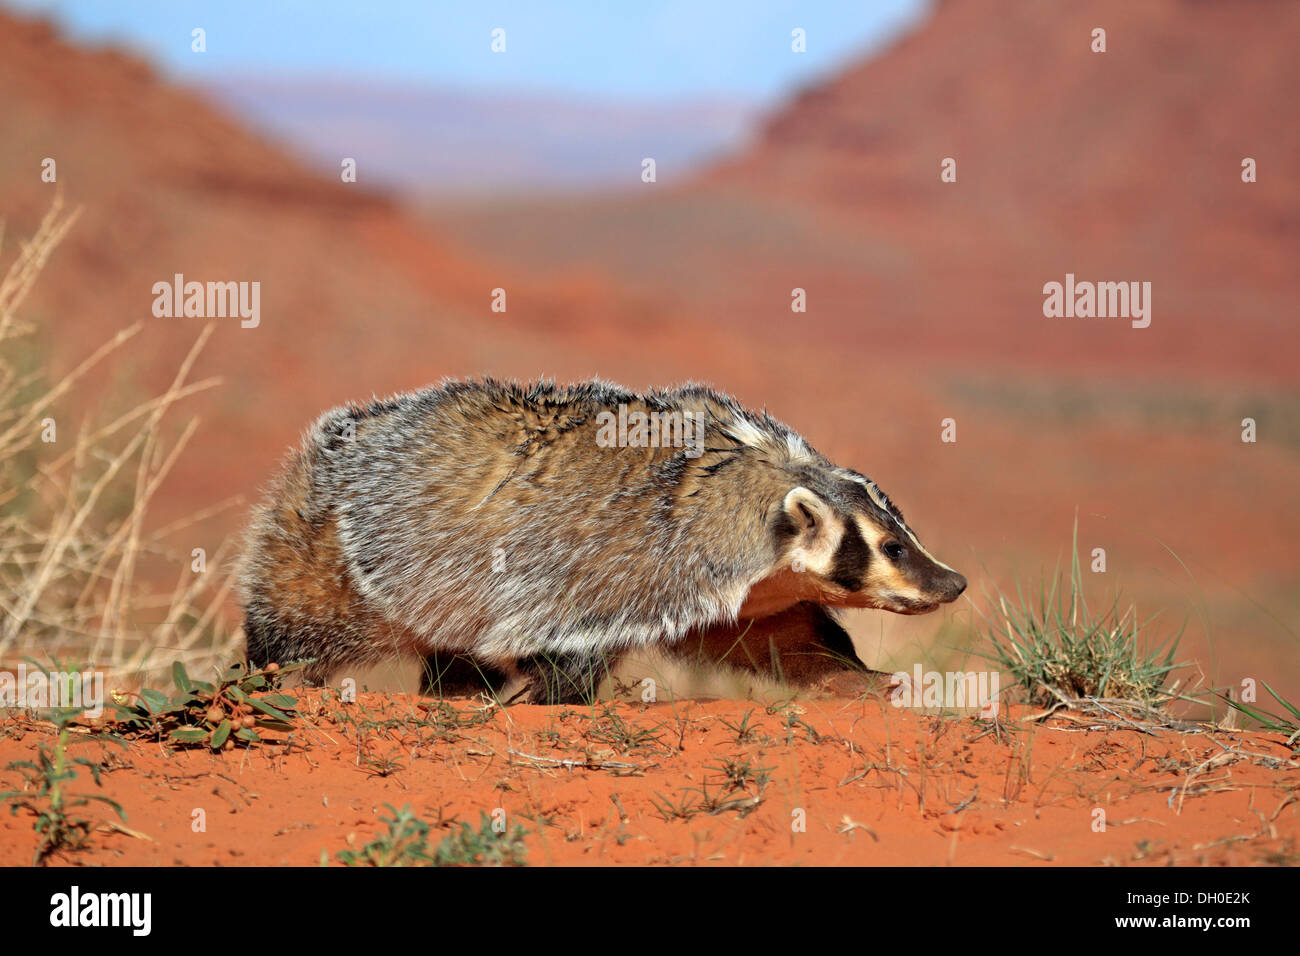 American badger (Taxidea taxus), captive, Monument Valley, Utah, United States Stock Photo